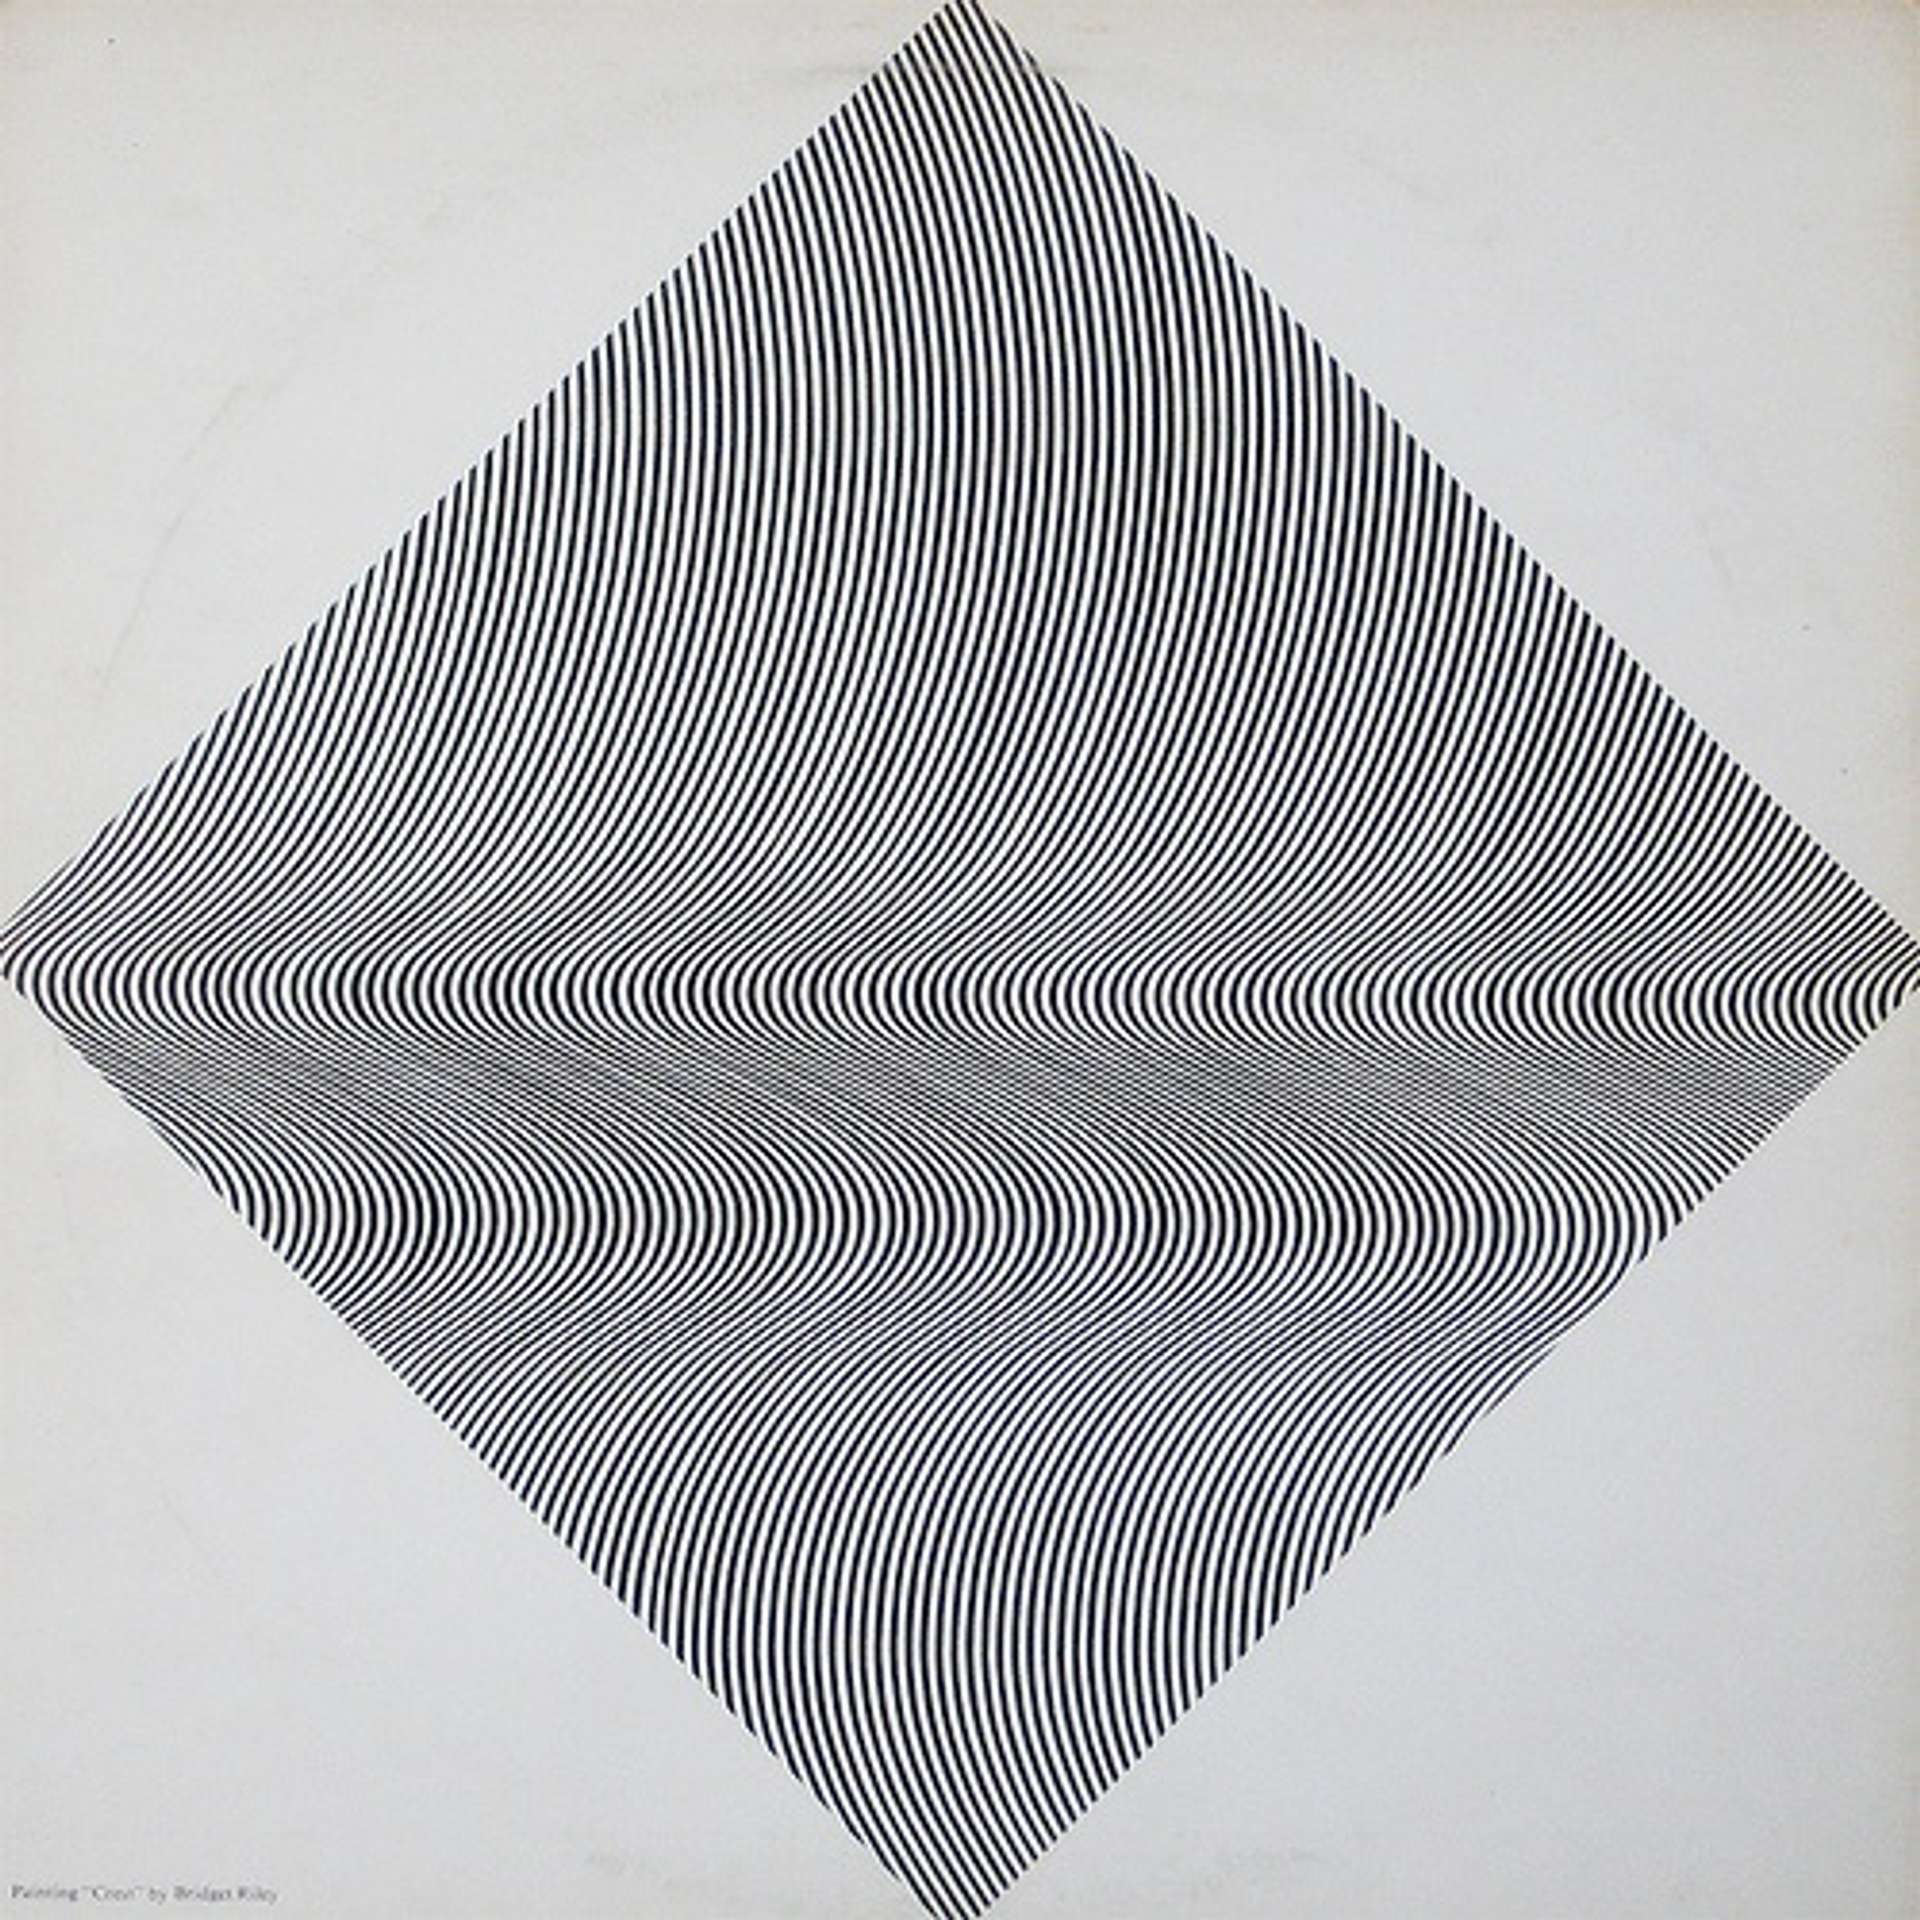 An image of the album cover for The Faust Tapes, designed by artist Bridget Riley. It is a black and white optical illusion, creating a disorienting sense of waves on a flat canvas.]